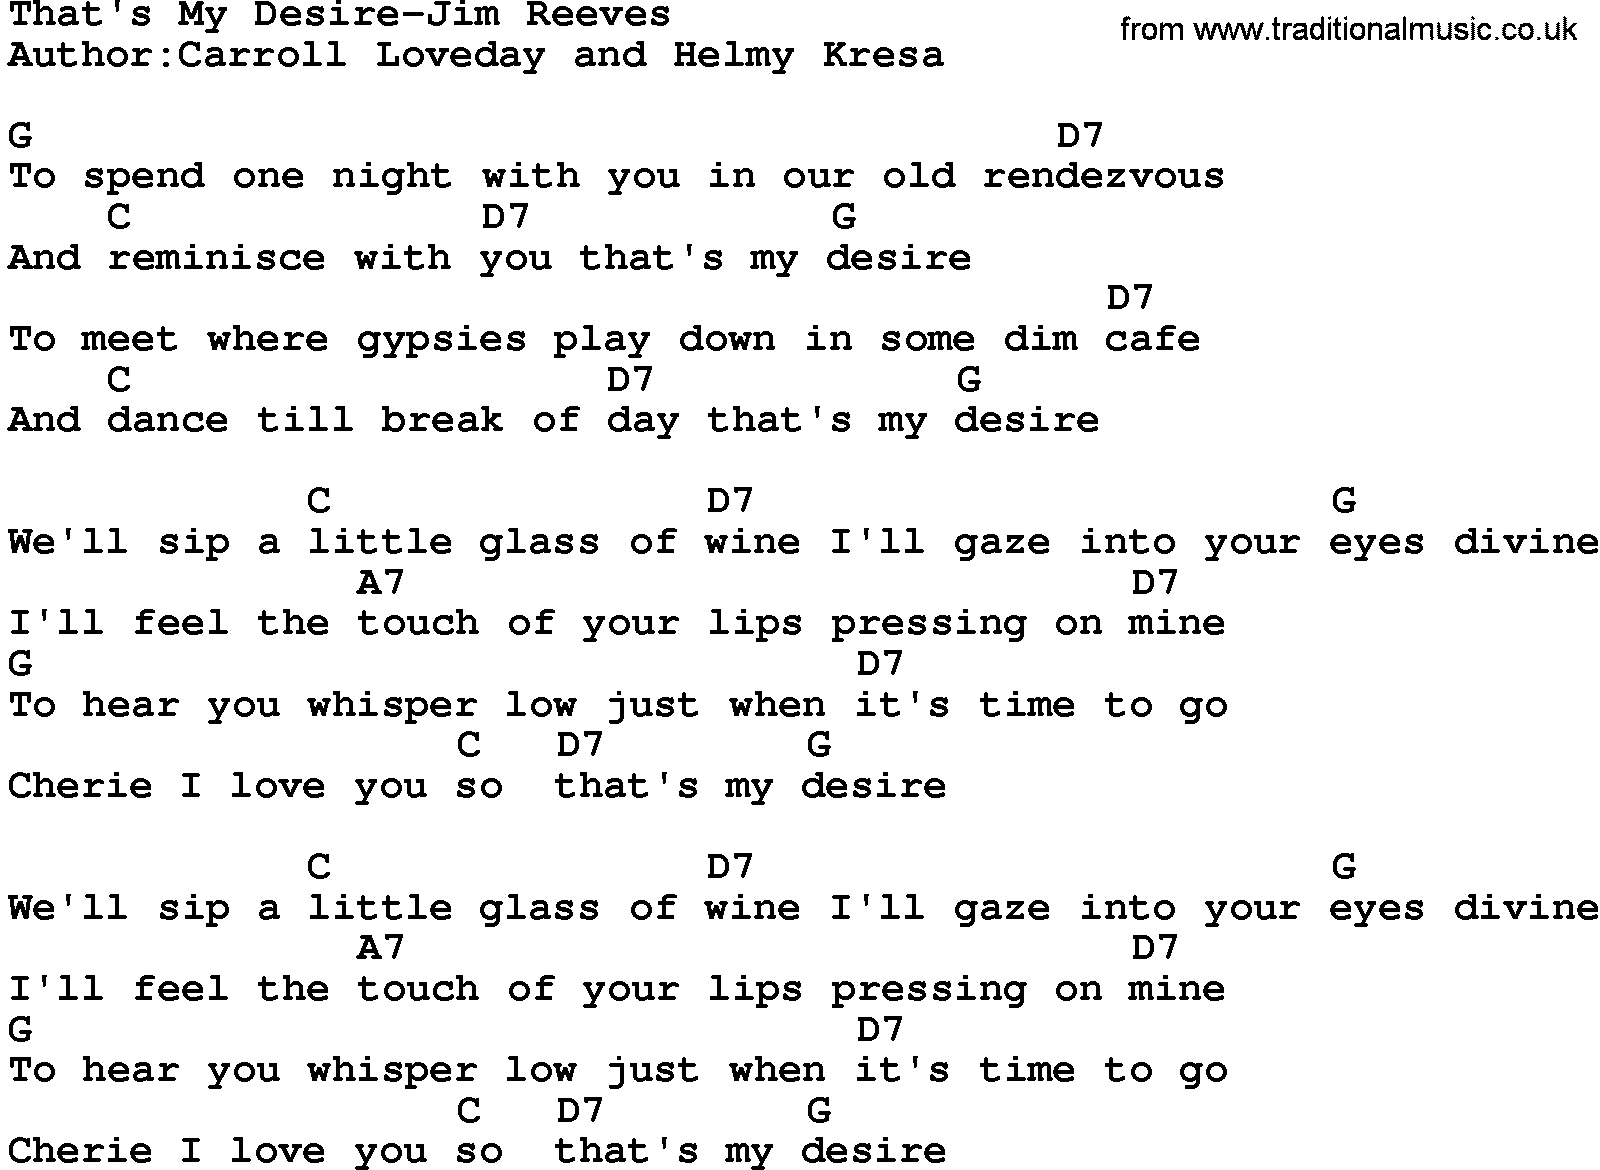 Country music song: That's My Desire-Jim Reeves lyrics and chords